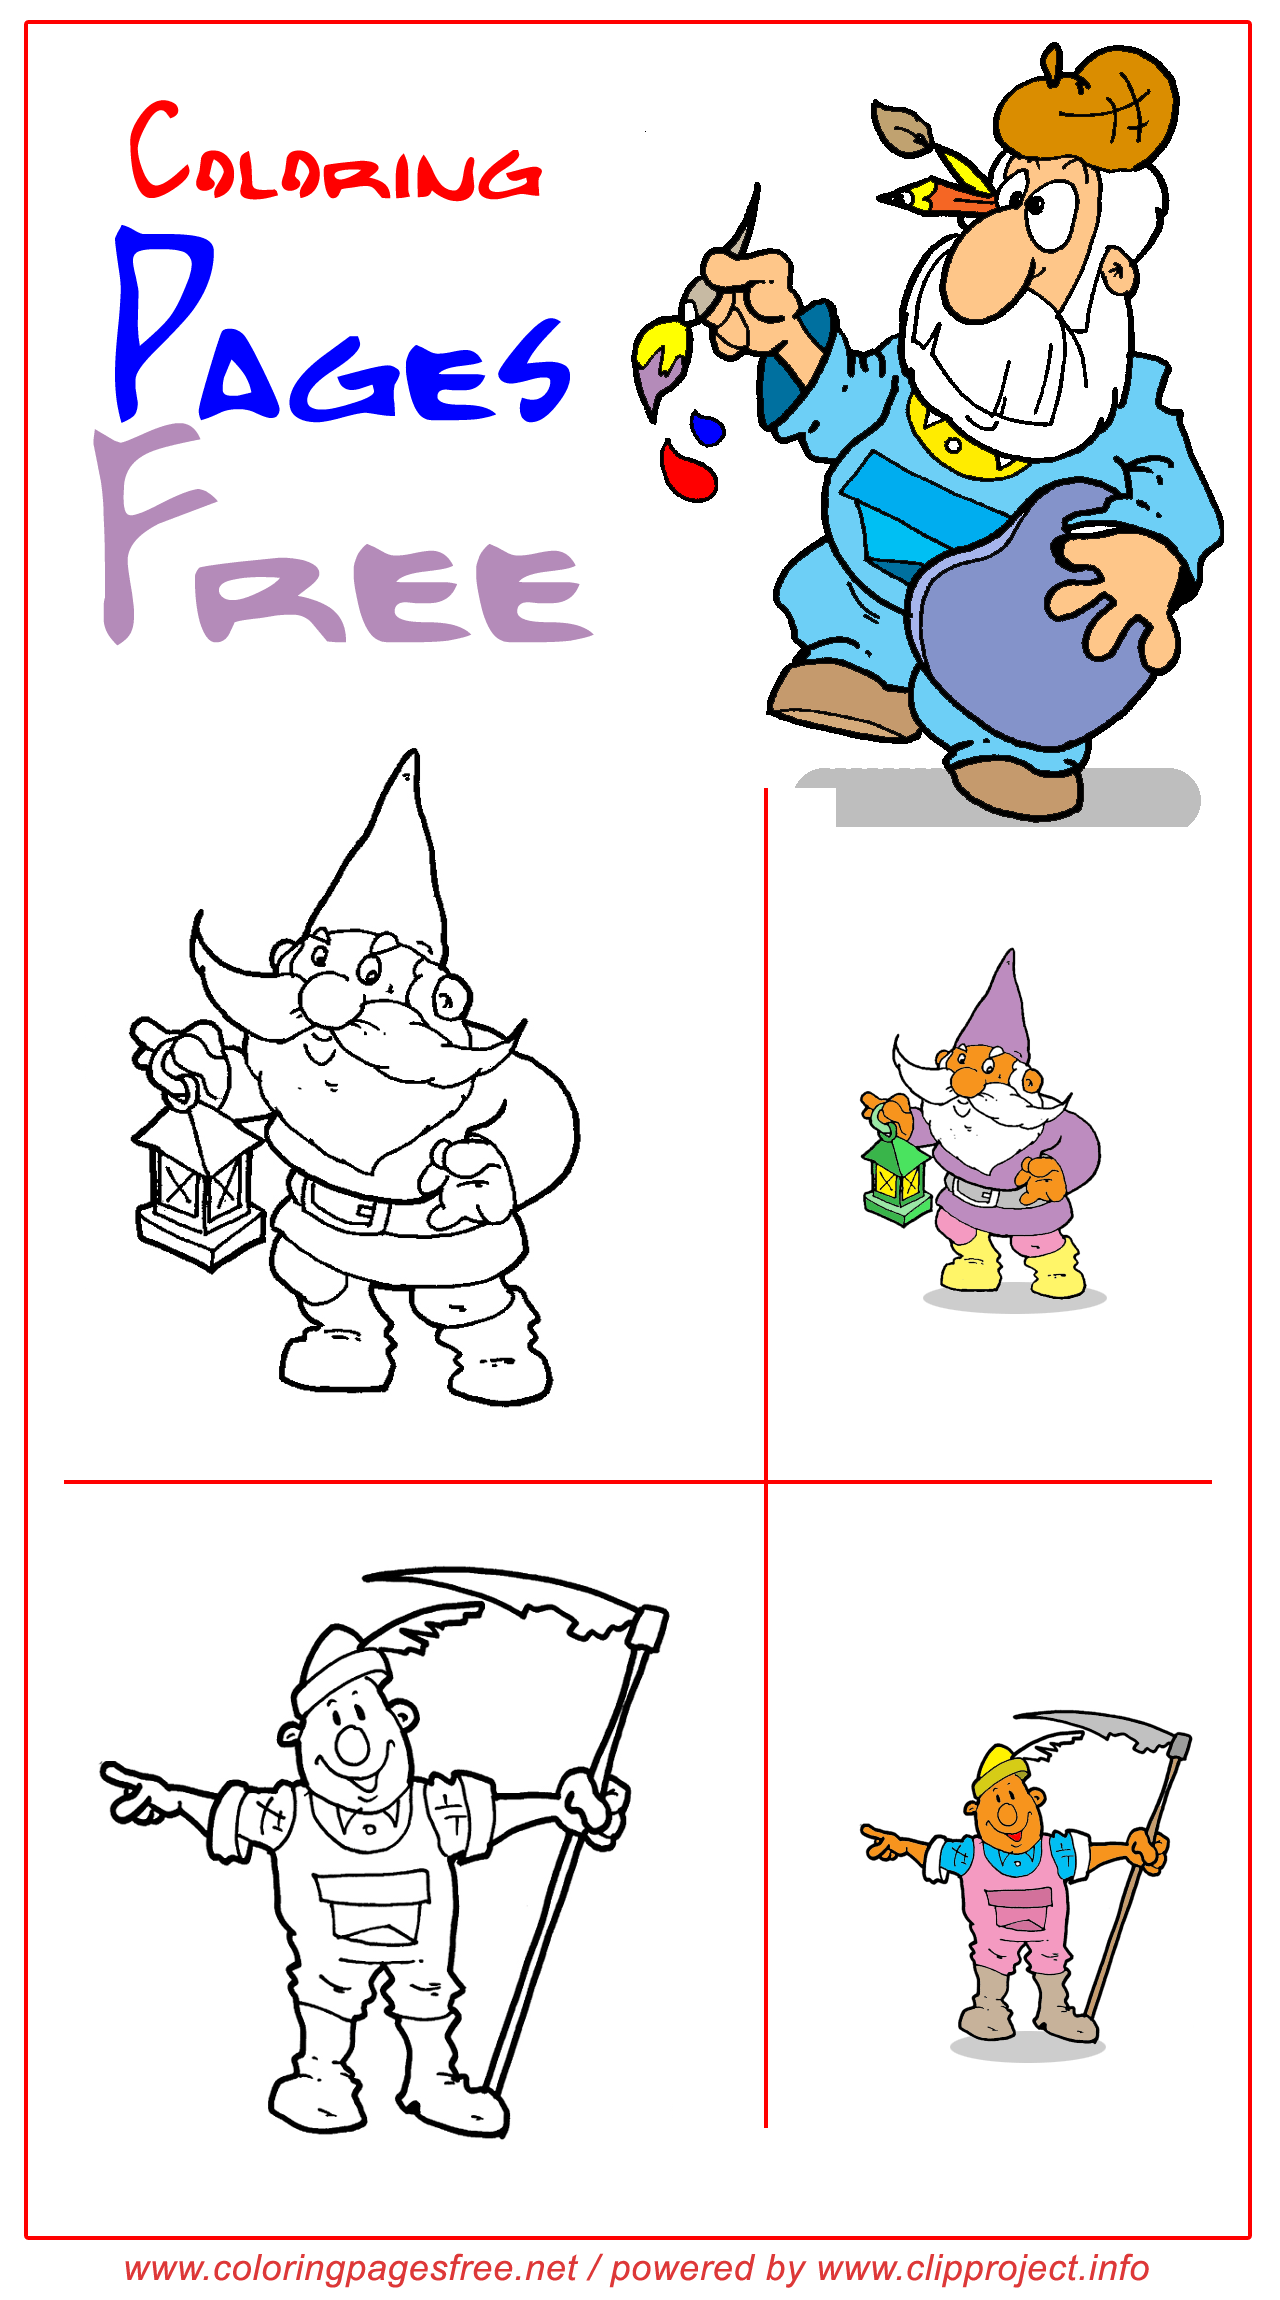 Free colouring pages for children, pupils, school, students, images, Image, download online free